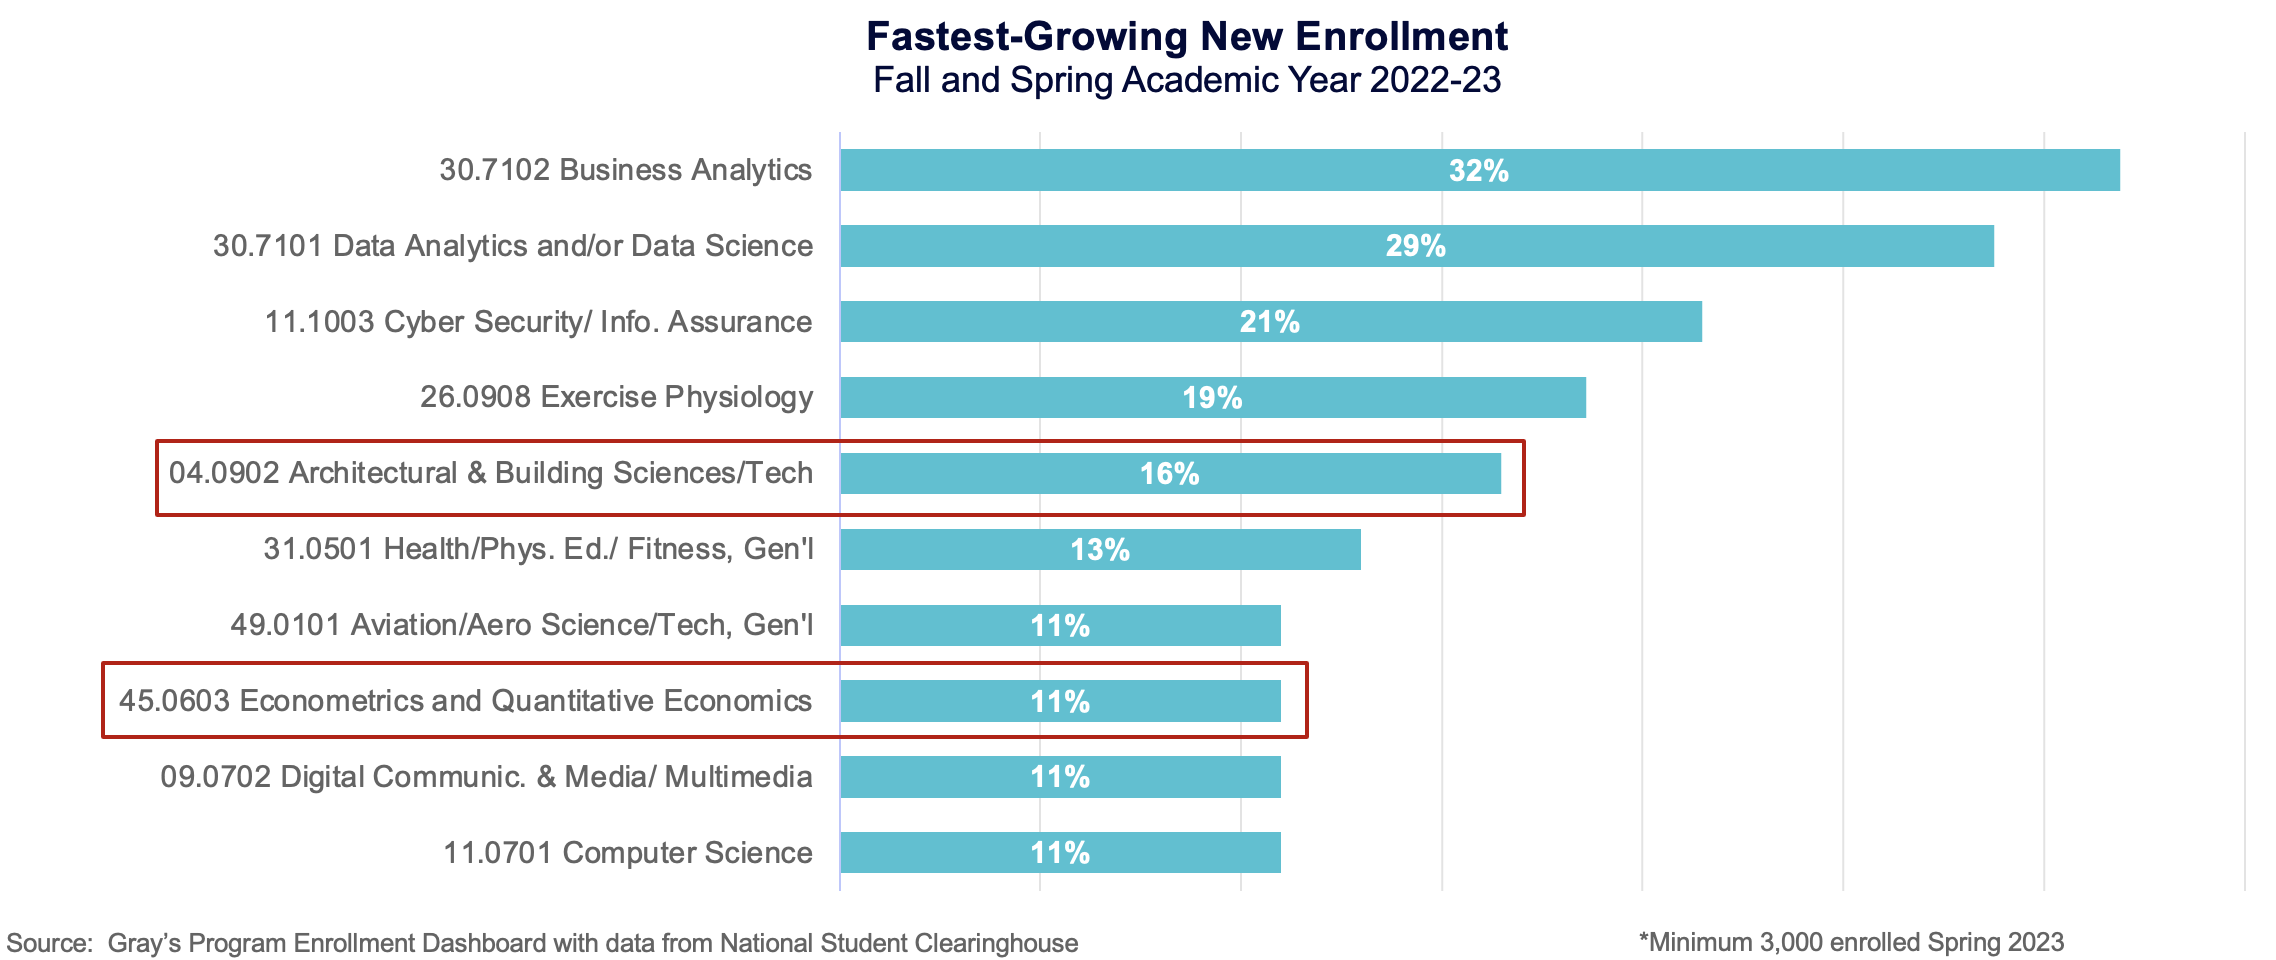 Fastest-Growing New Enrollment (Fall and Spring Academic Year 2022-23)